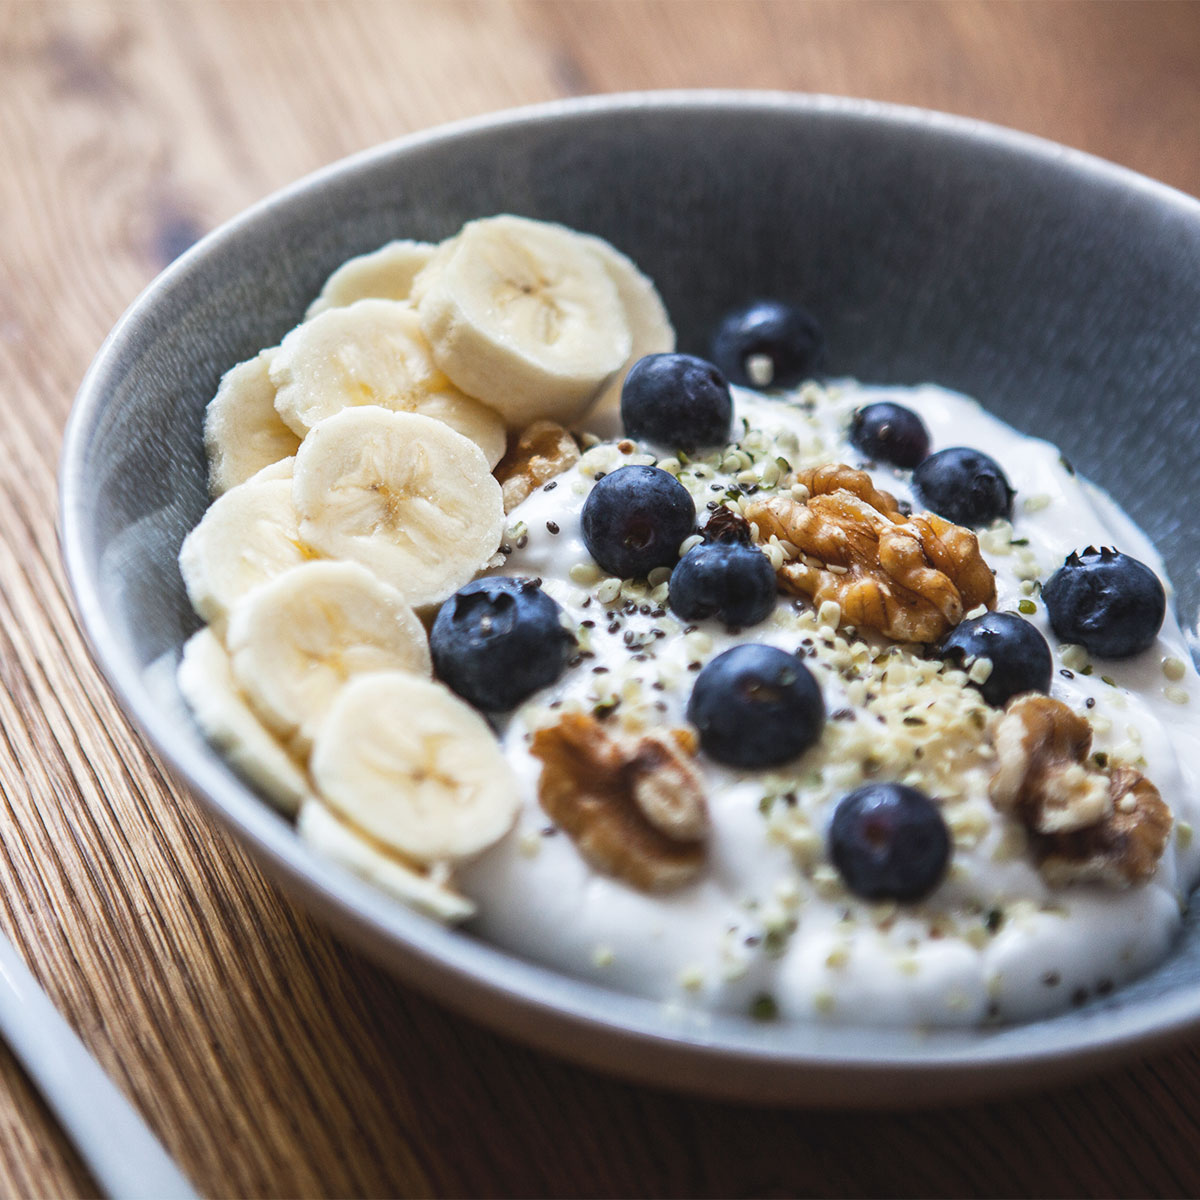 yogurt topped with blueberries and nuts